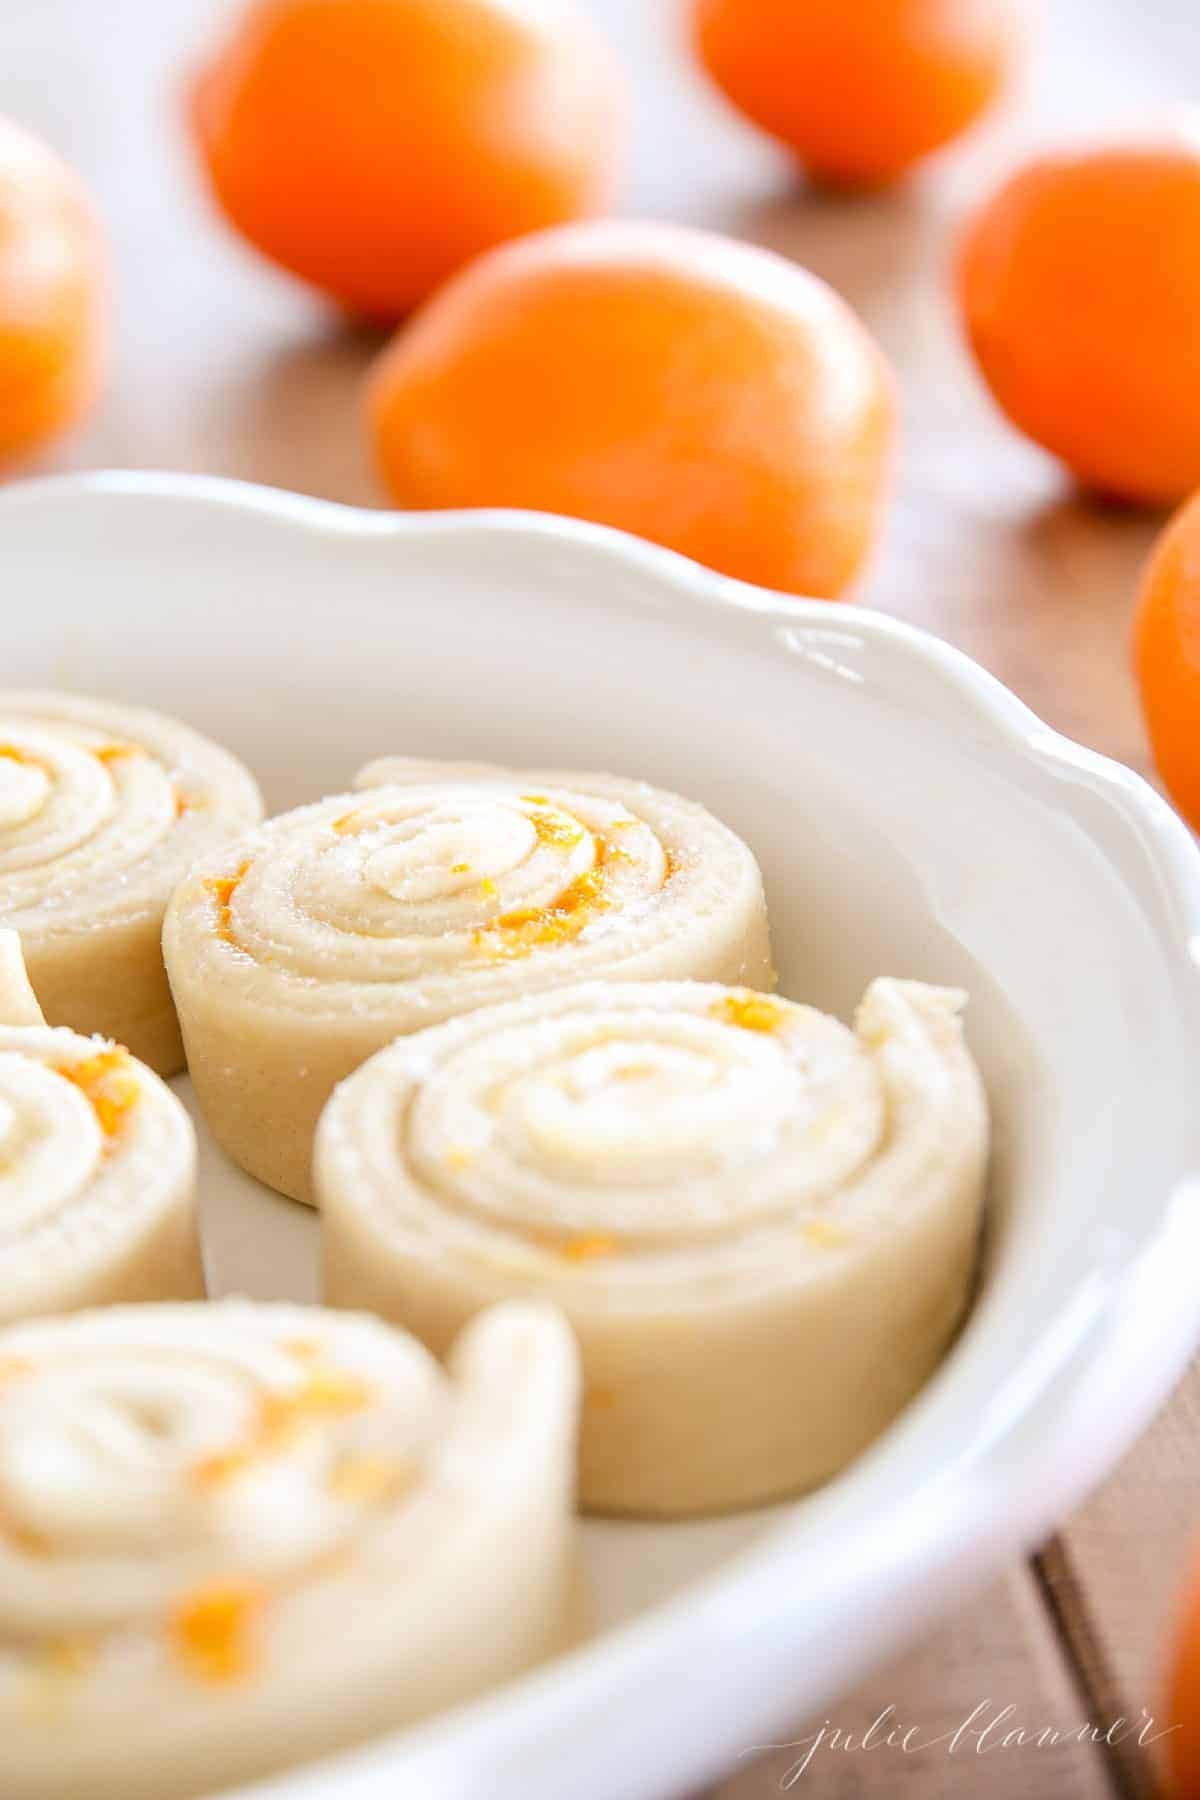 A white pan full of uncooked homemade orange roll recipe, whole oranges in the background.